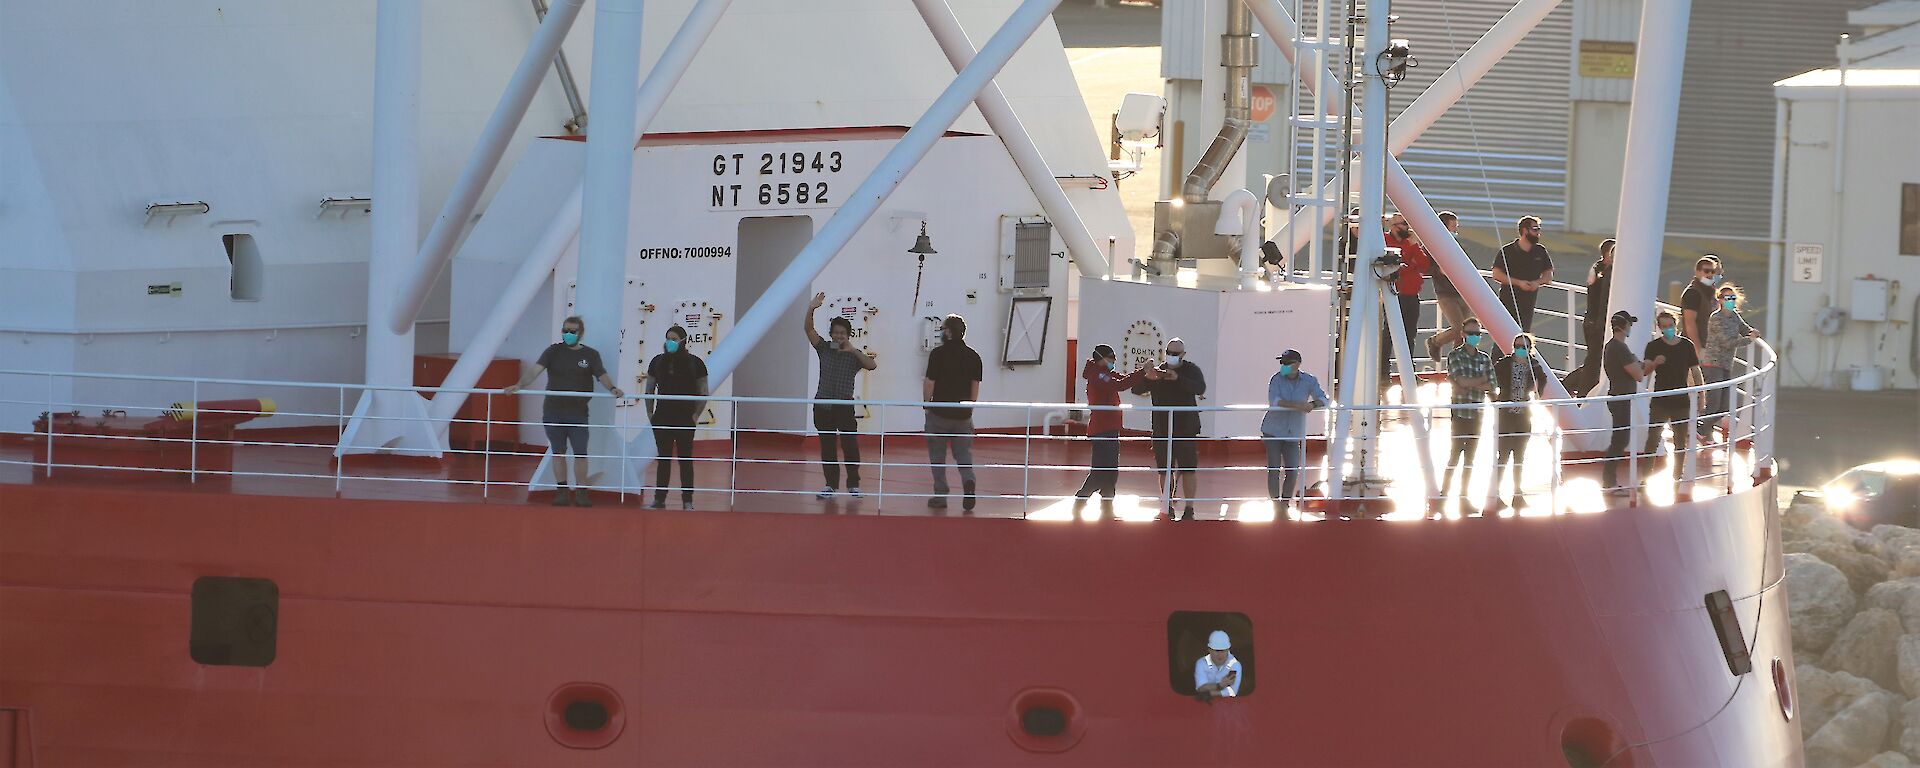 expeditioners on ship bow as approaches dock